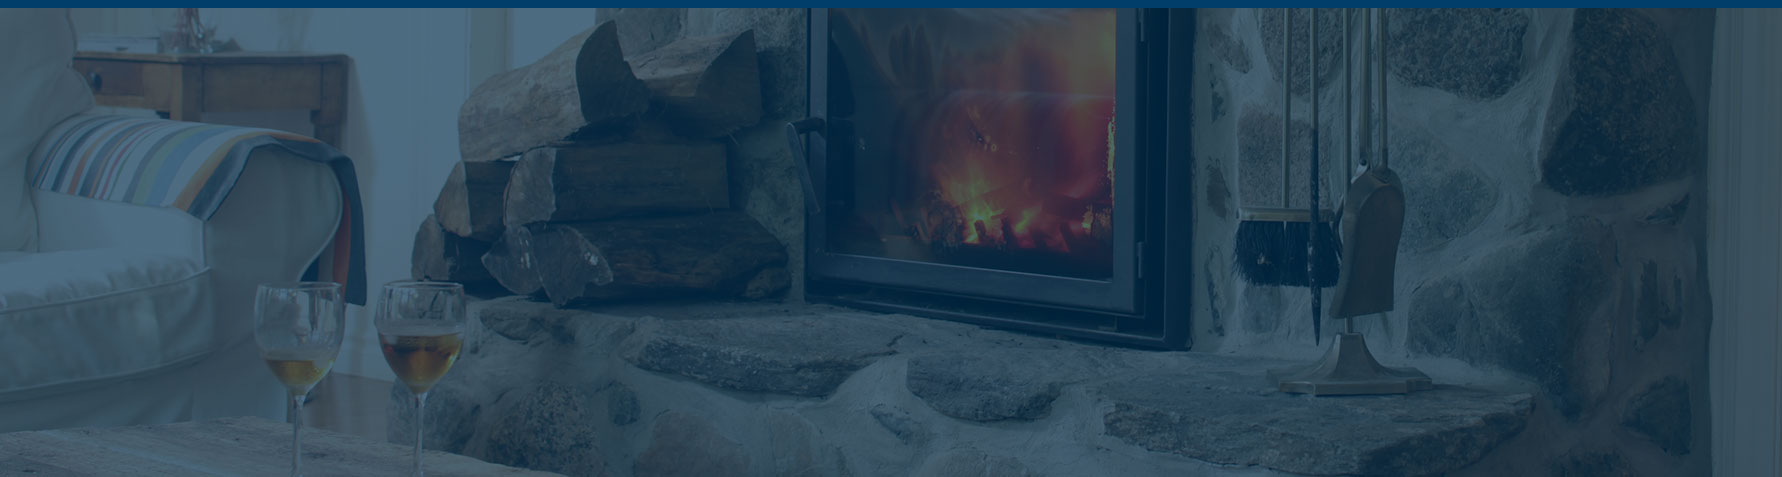 Visit our member directory for fireplace insert manufacturers.